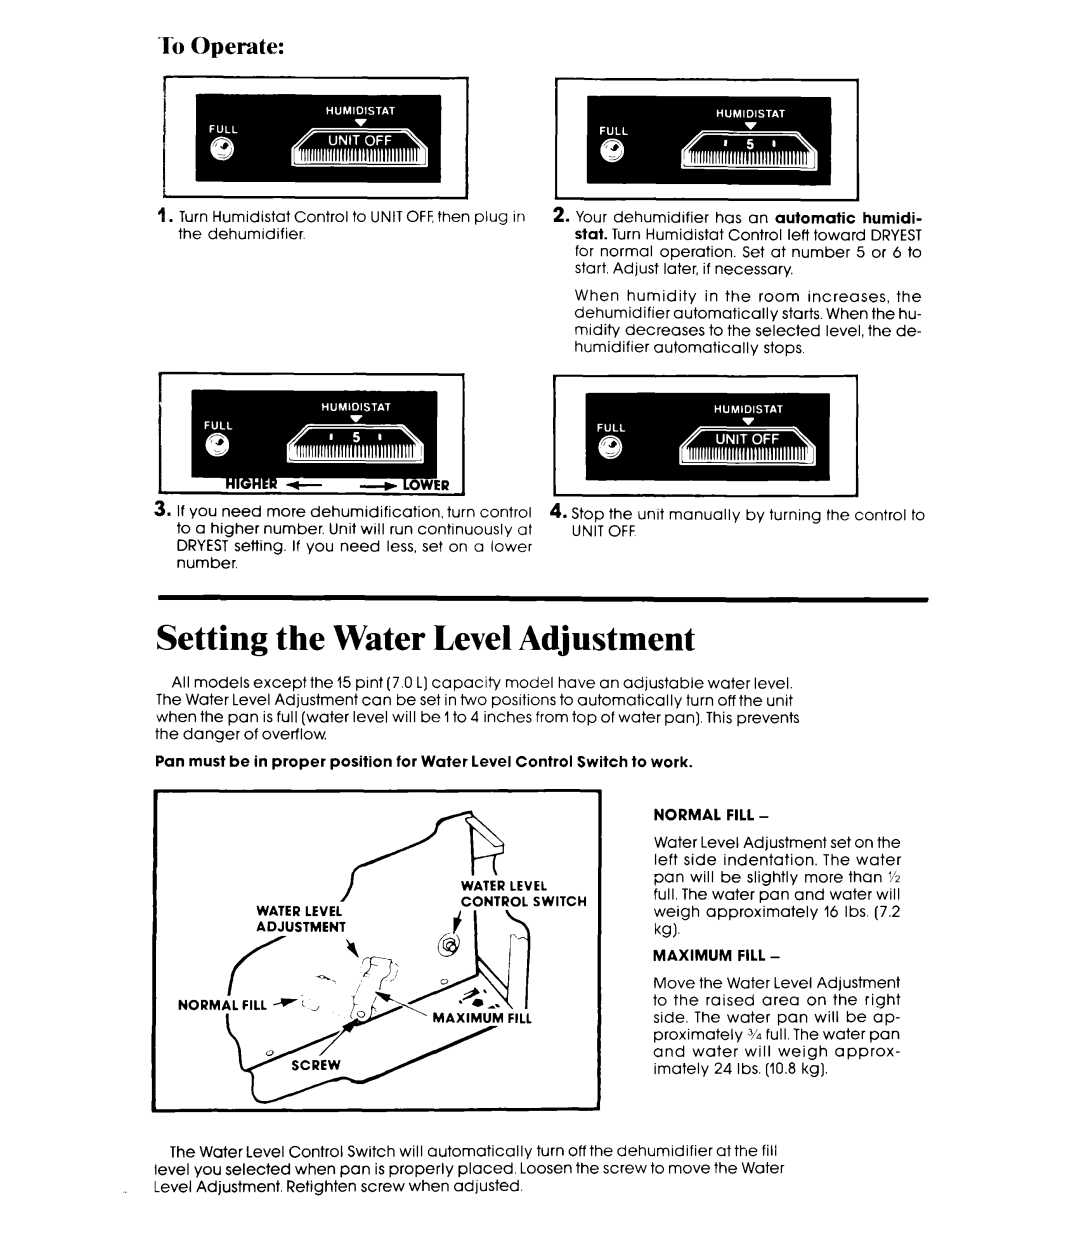 Whirlpool AD0402XS0 manual Setting the Water Level Adjustment, To Operate 